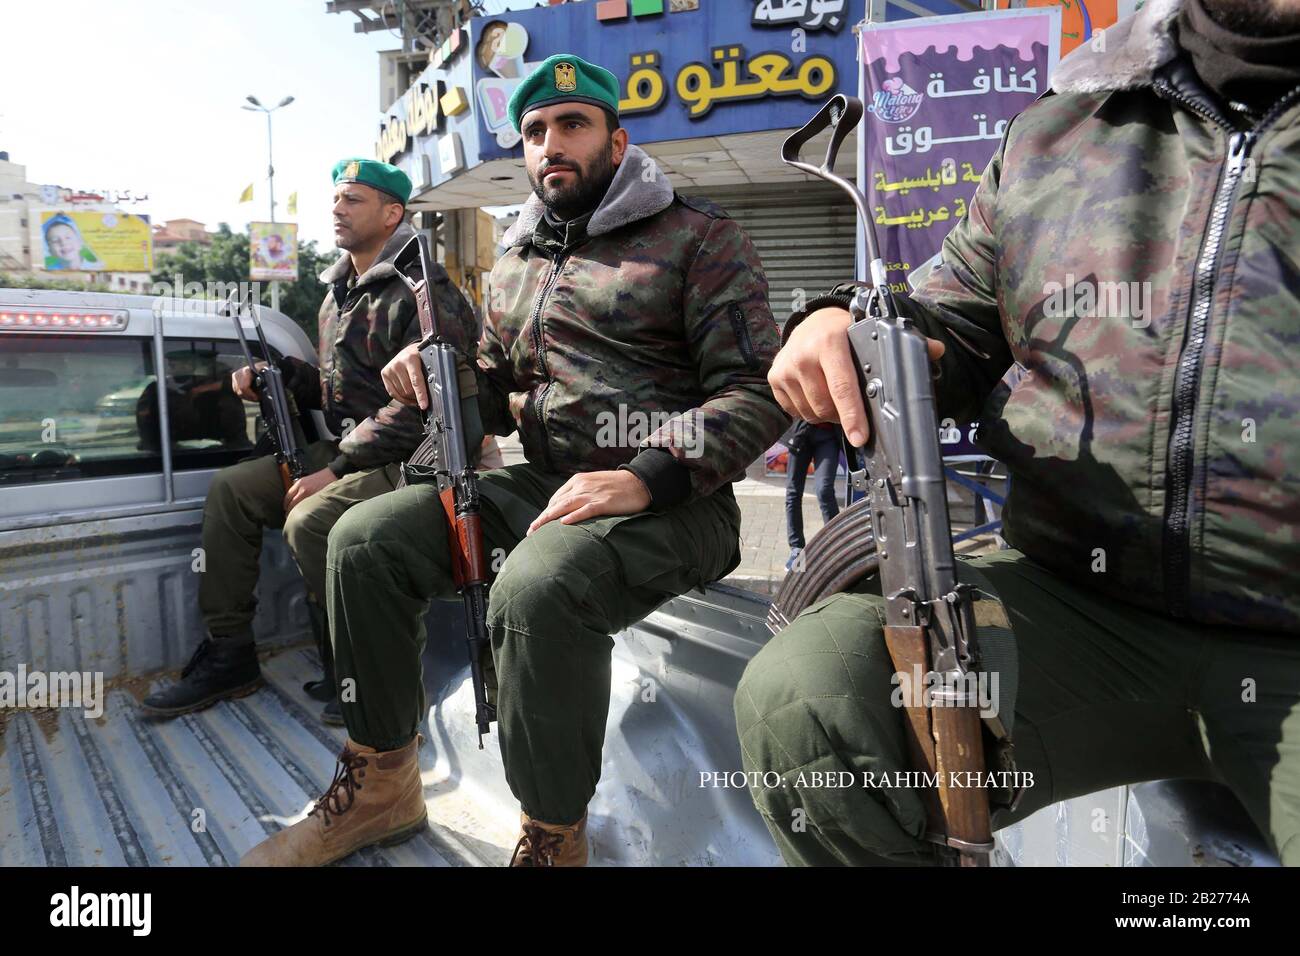 Palestinian security members take part in the International Civil Defense Day, in Gaza Strip, on March 1, 2020. Photo by Abed Rahim Khatib/Alamy Stock Photo